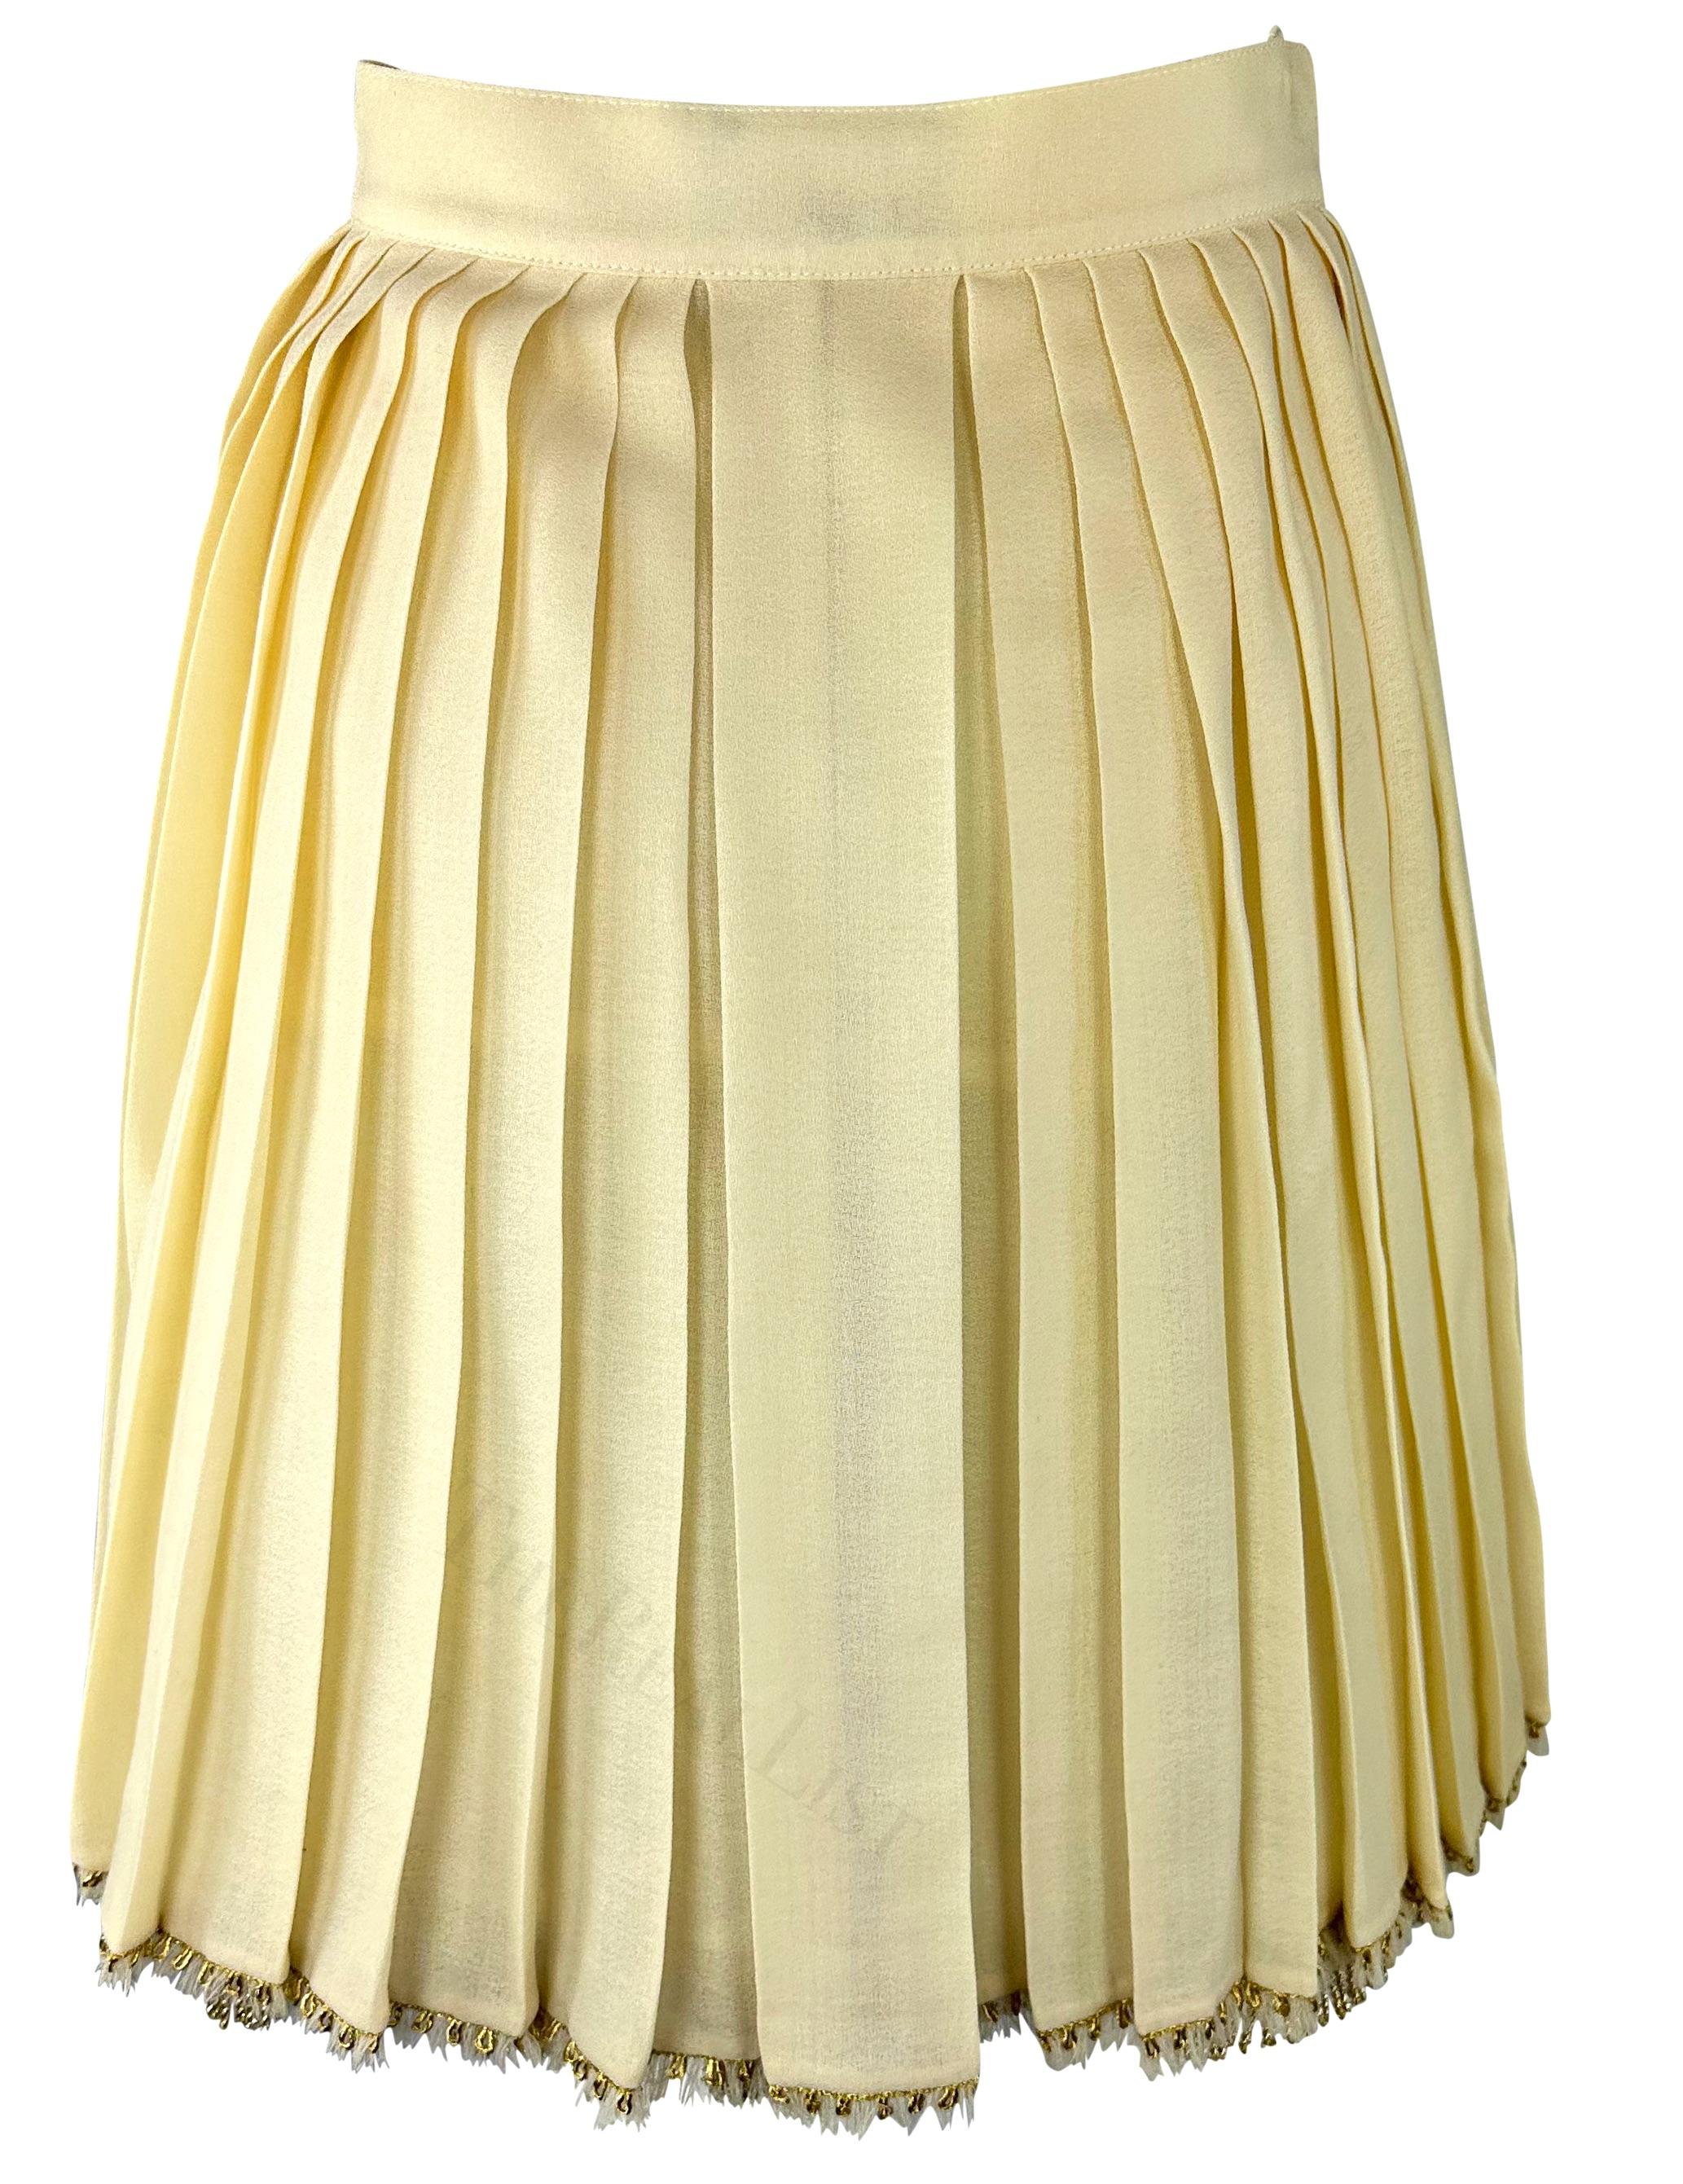 S/S 1992 Gianni Versace Couture Off-White Pleat Wrap Fringe Skirt Crinoline Set For Sale 1